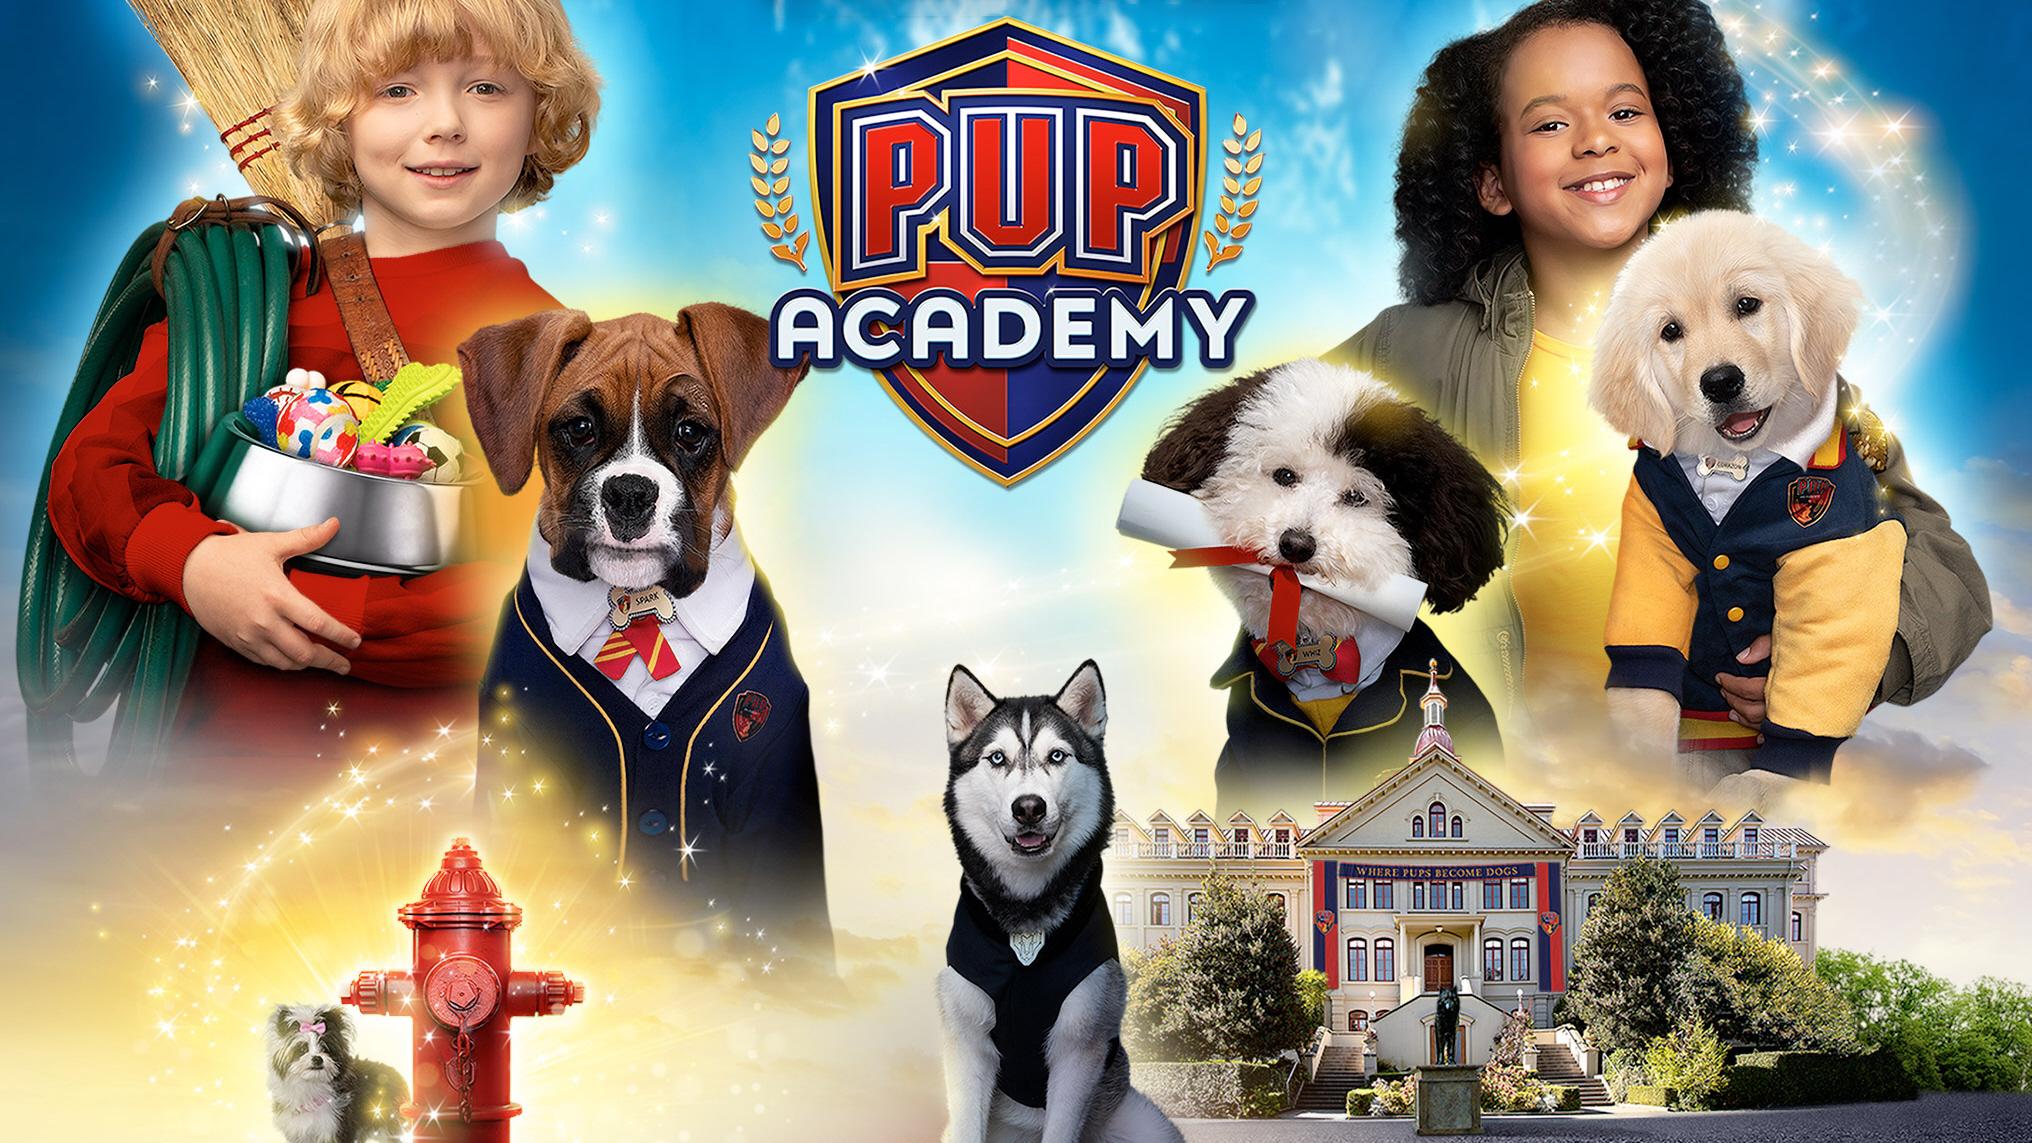 Stream And Watch Pup Academy Online